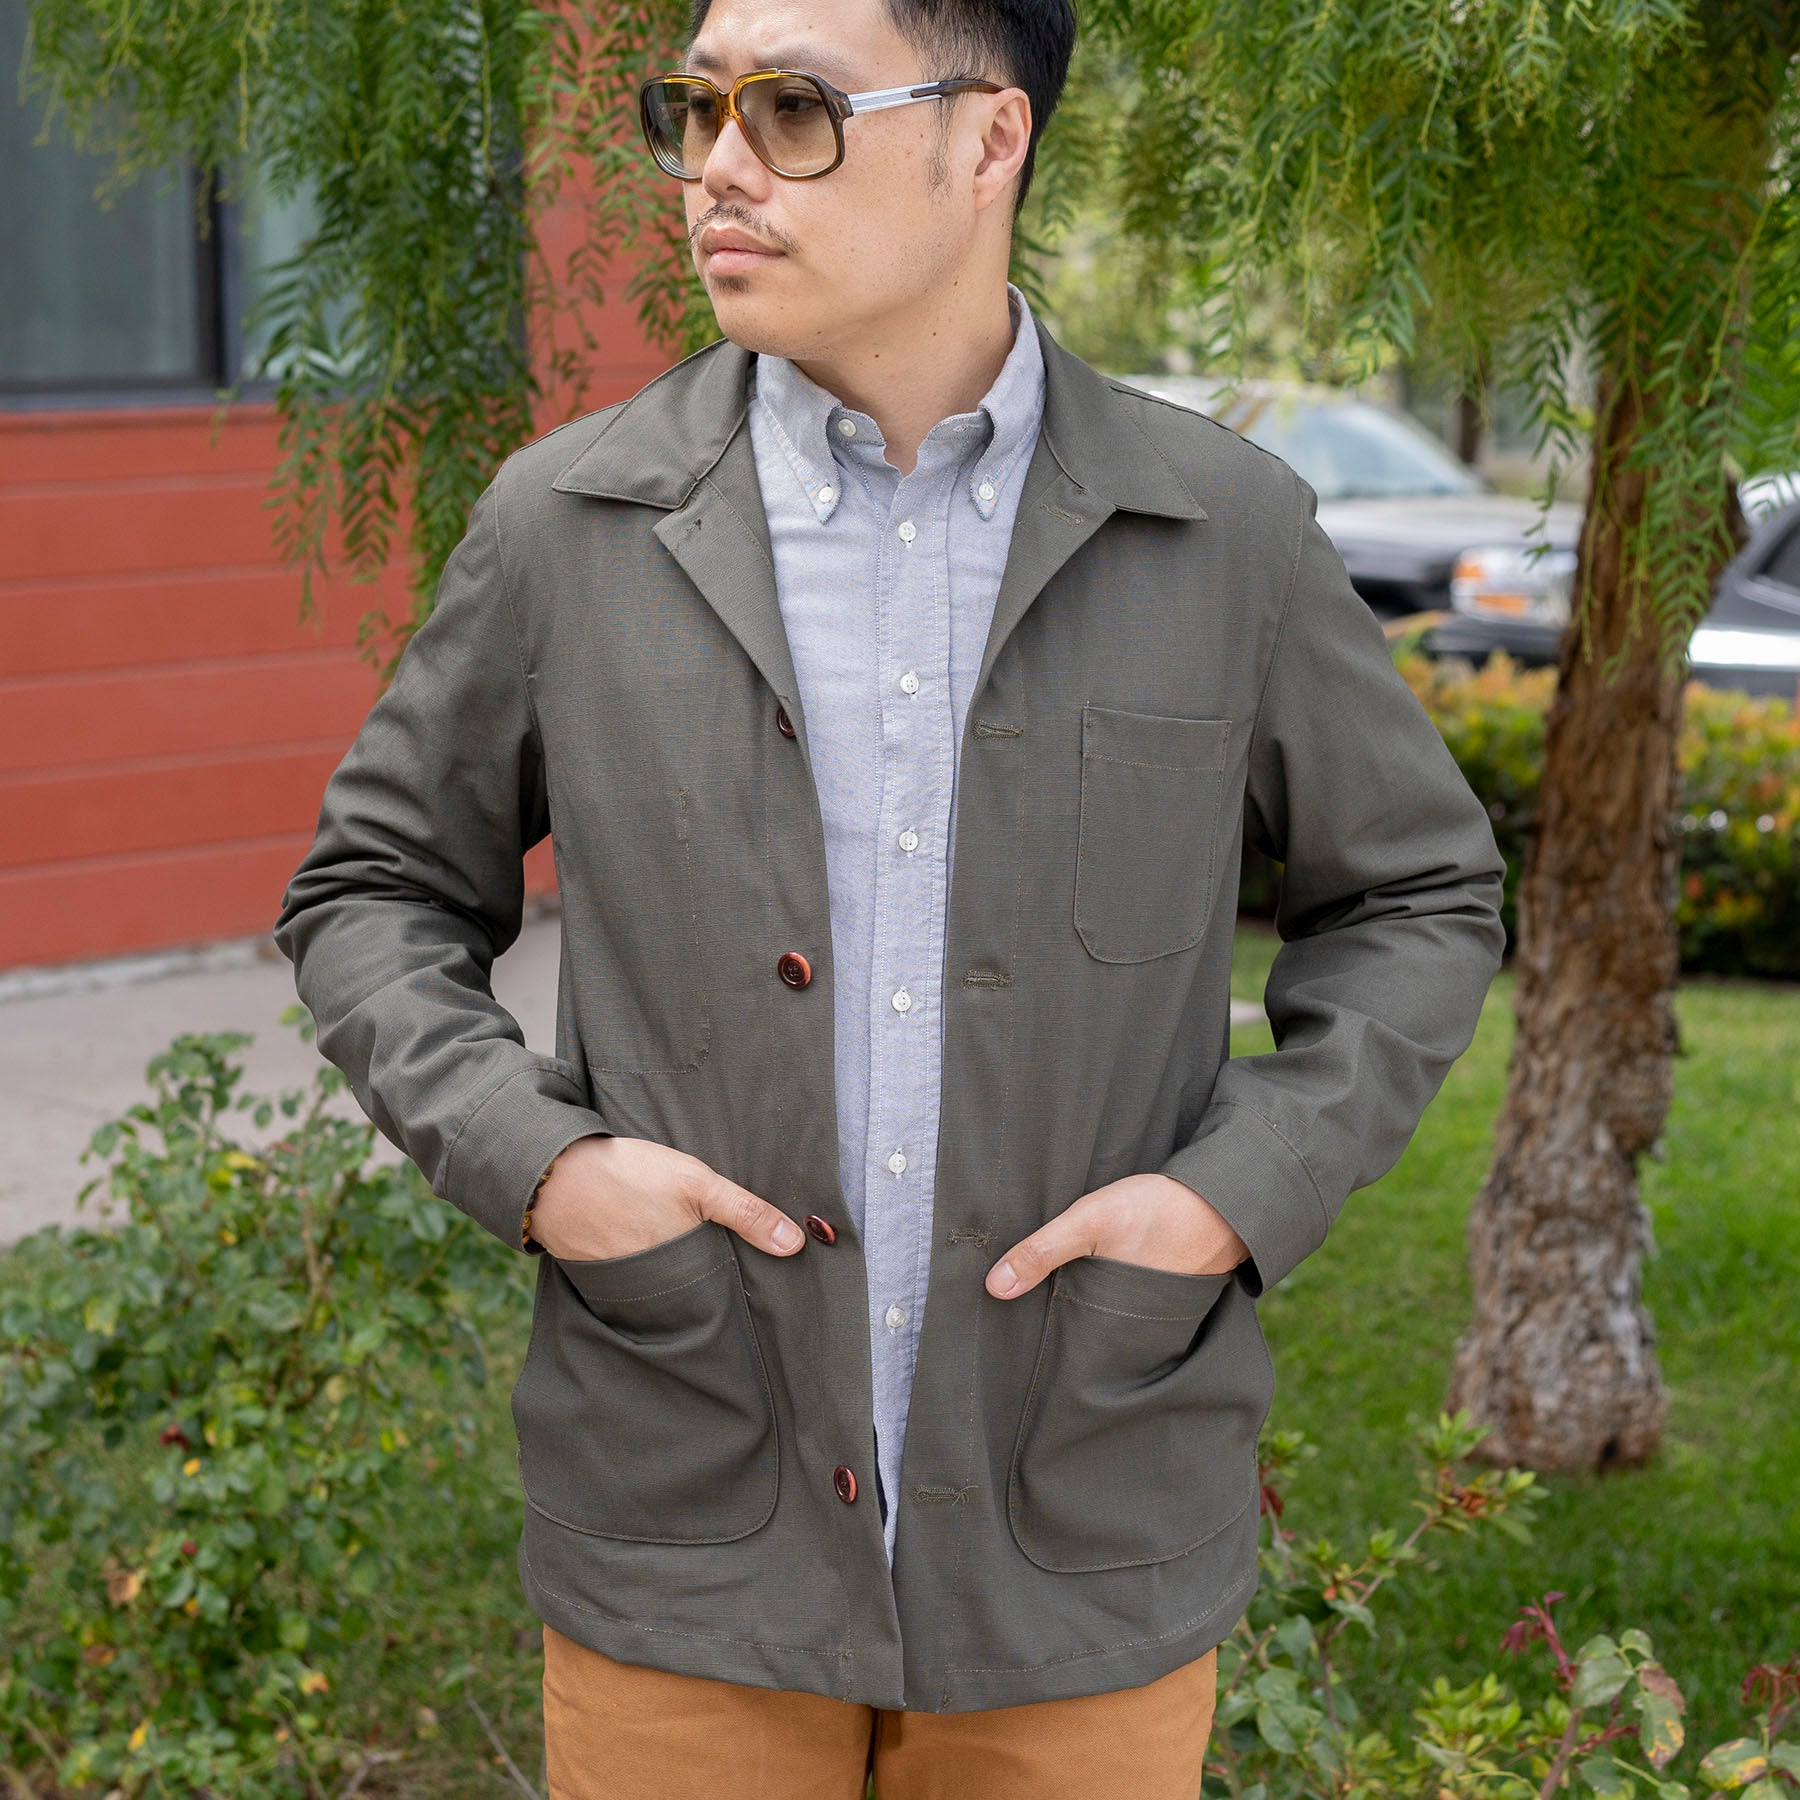 Doyle Jacket in Olive Military-Spec Cotton Ripstop Sz 38